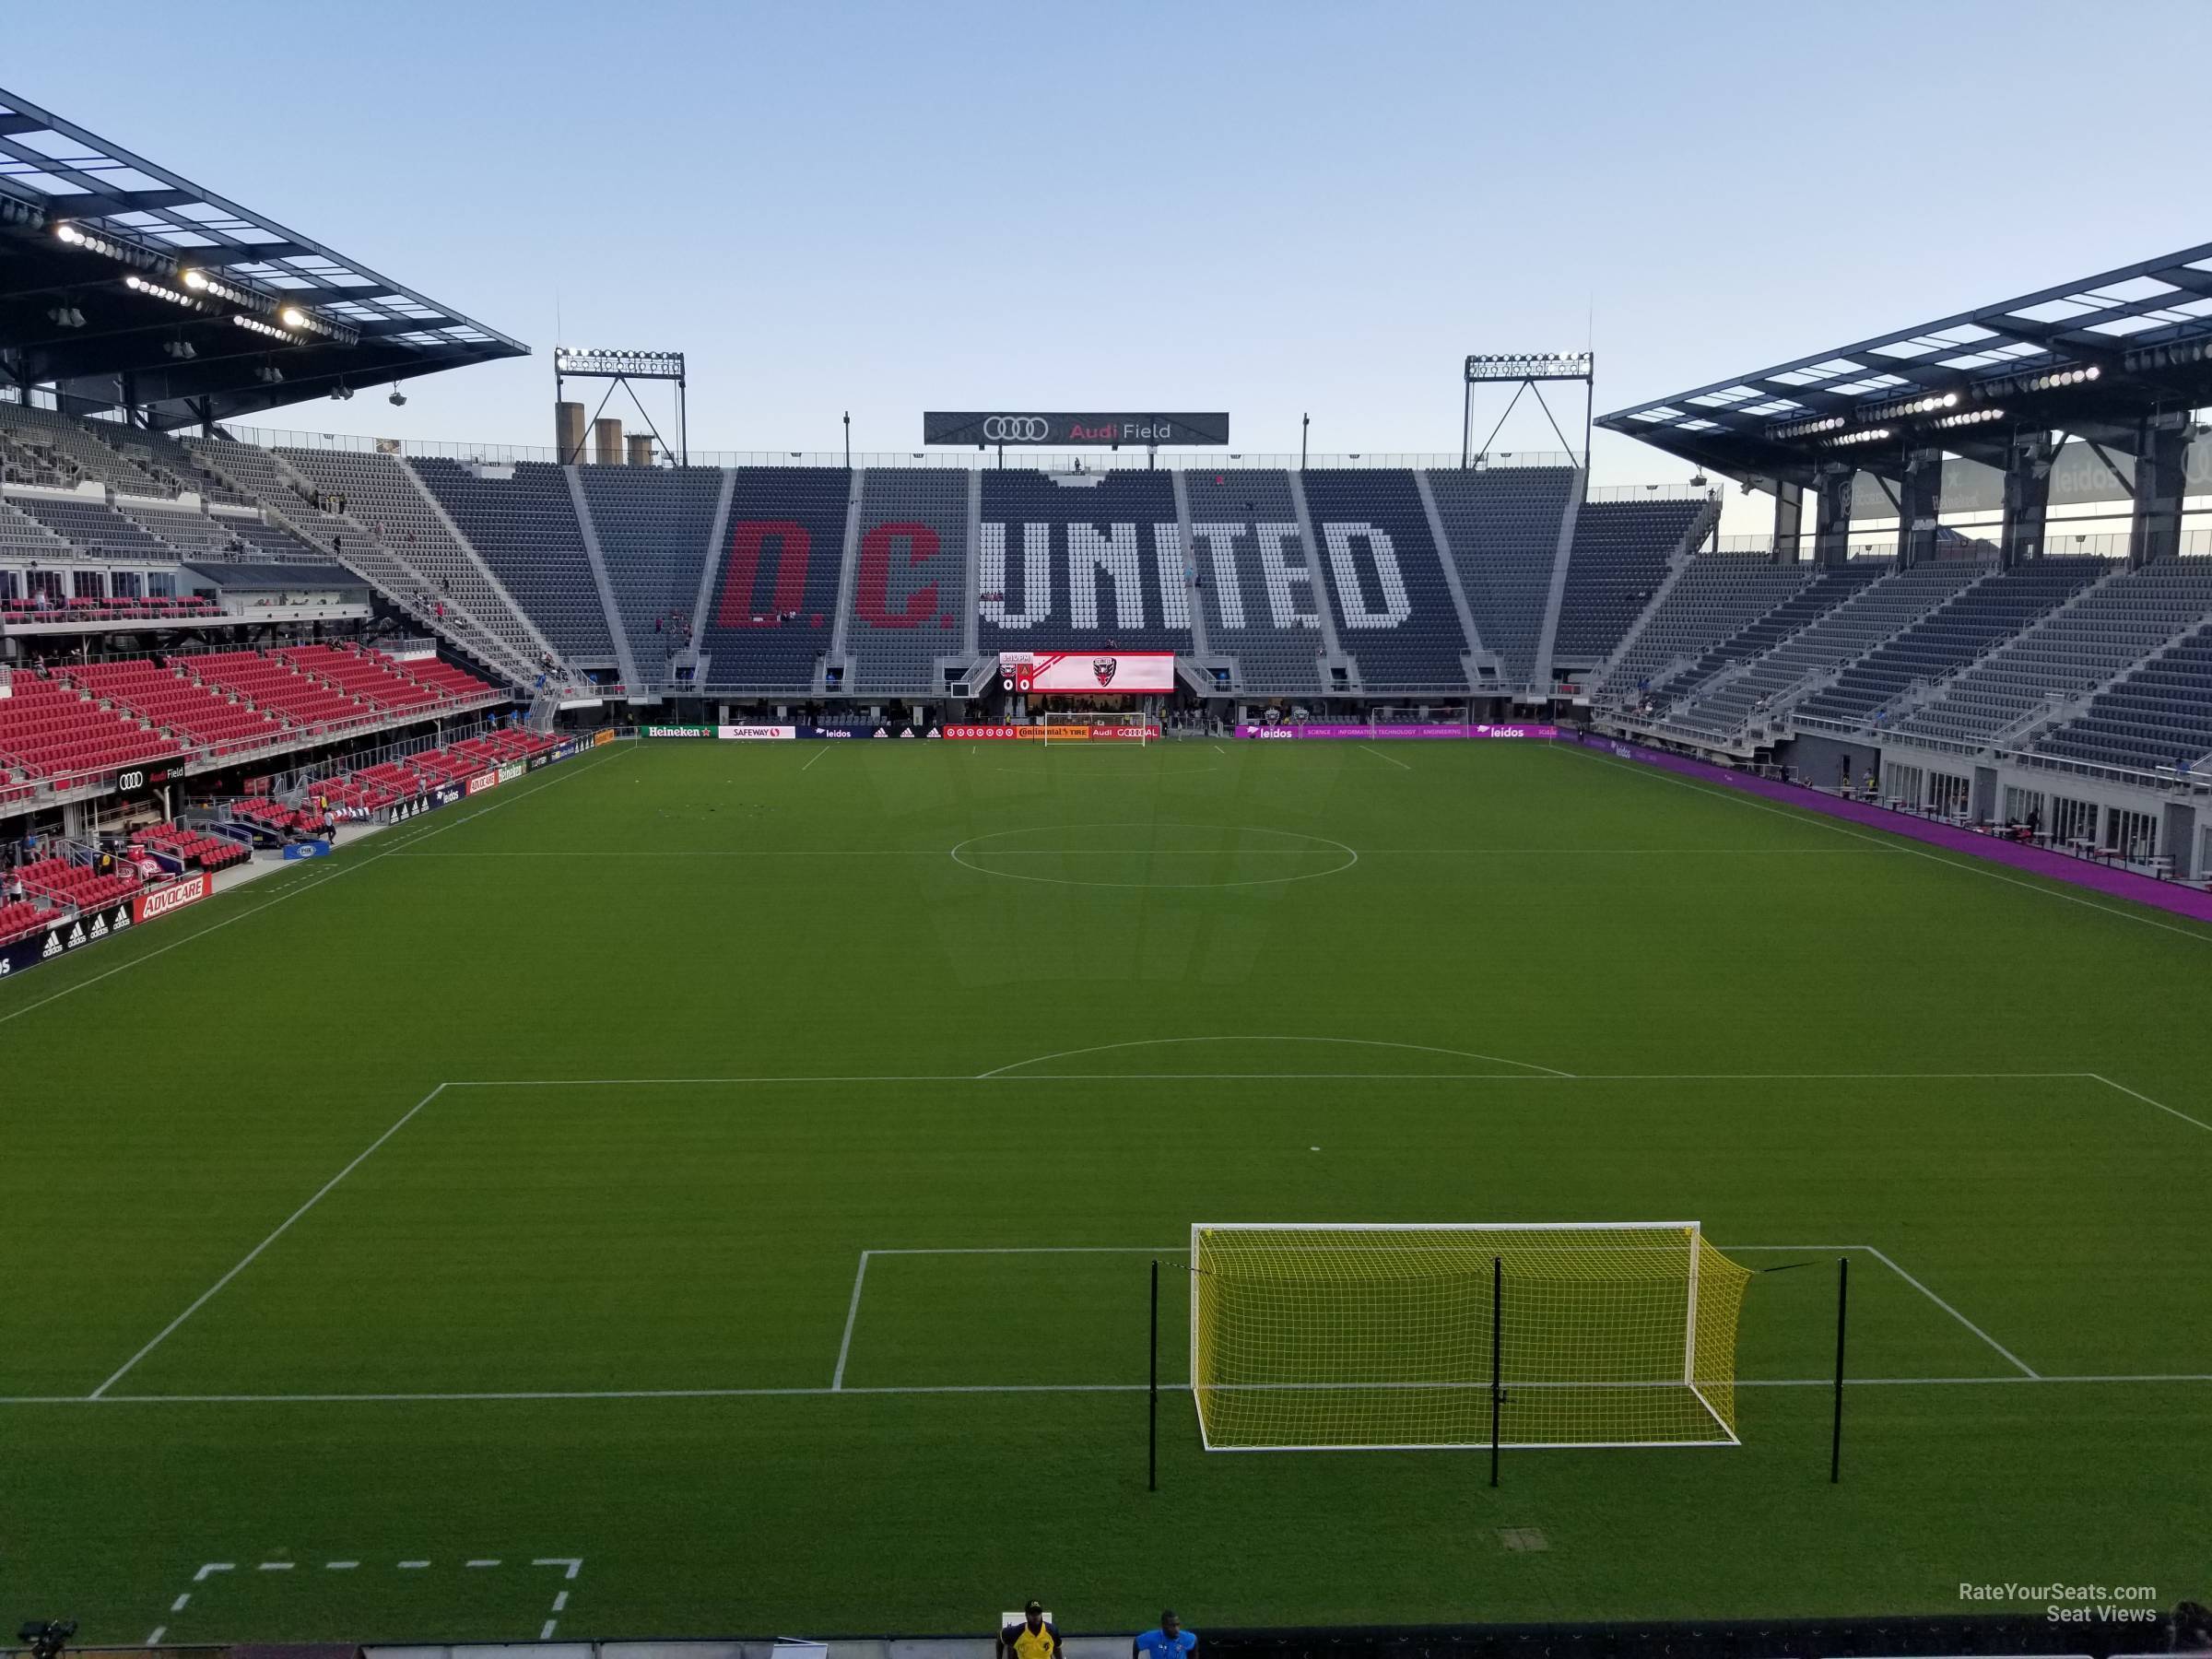 section 138, row 17 seat view  - audi field